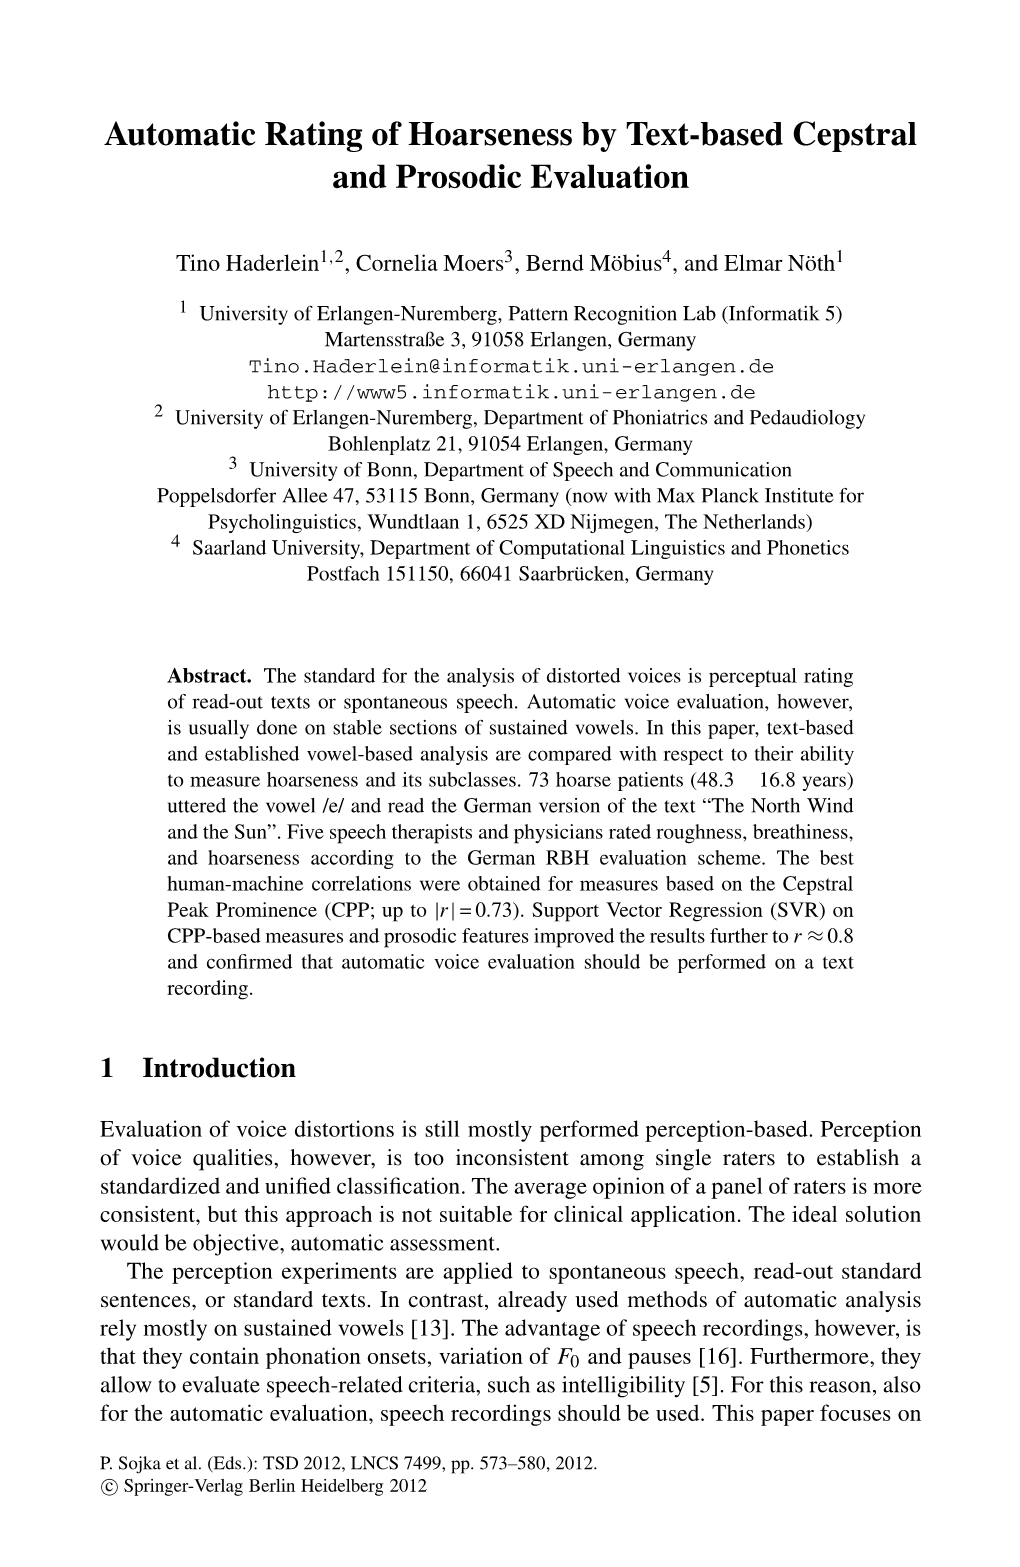 Automatic Rating of Hoarseness by Text-Based Cepstral and Prosodic Evaluation